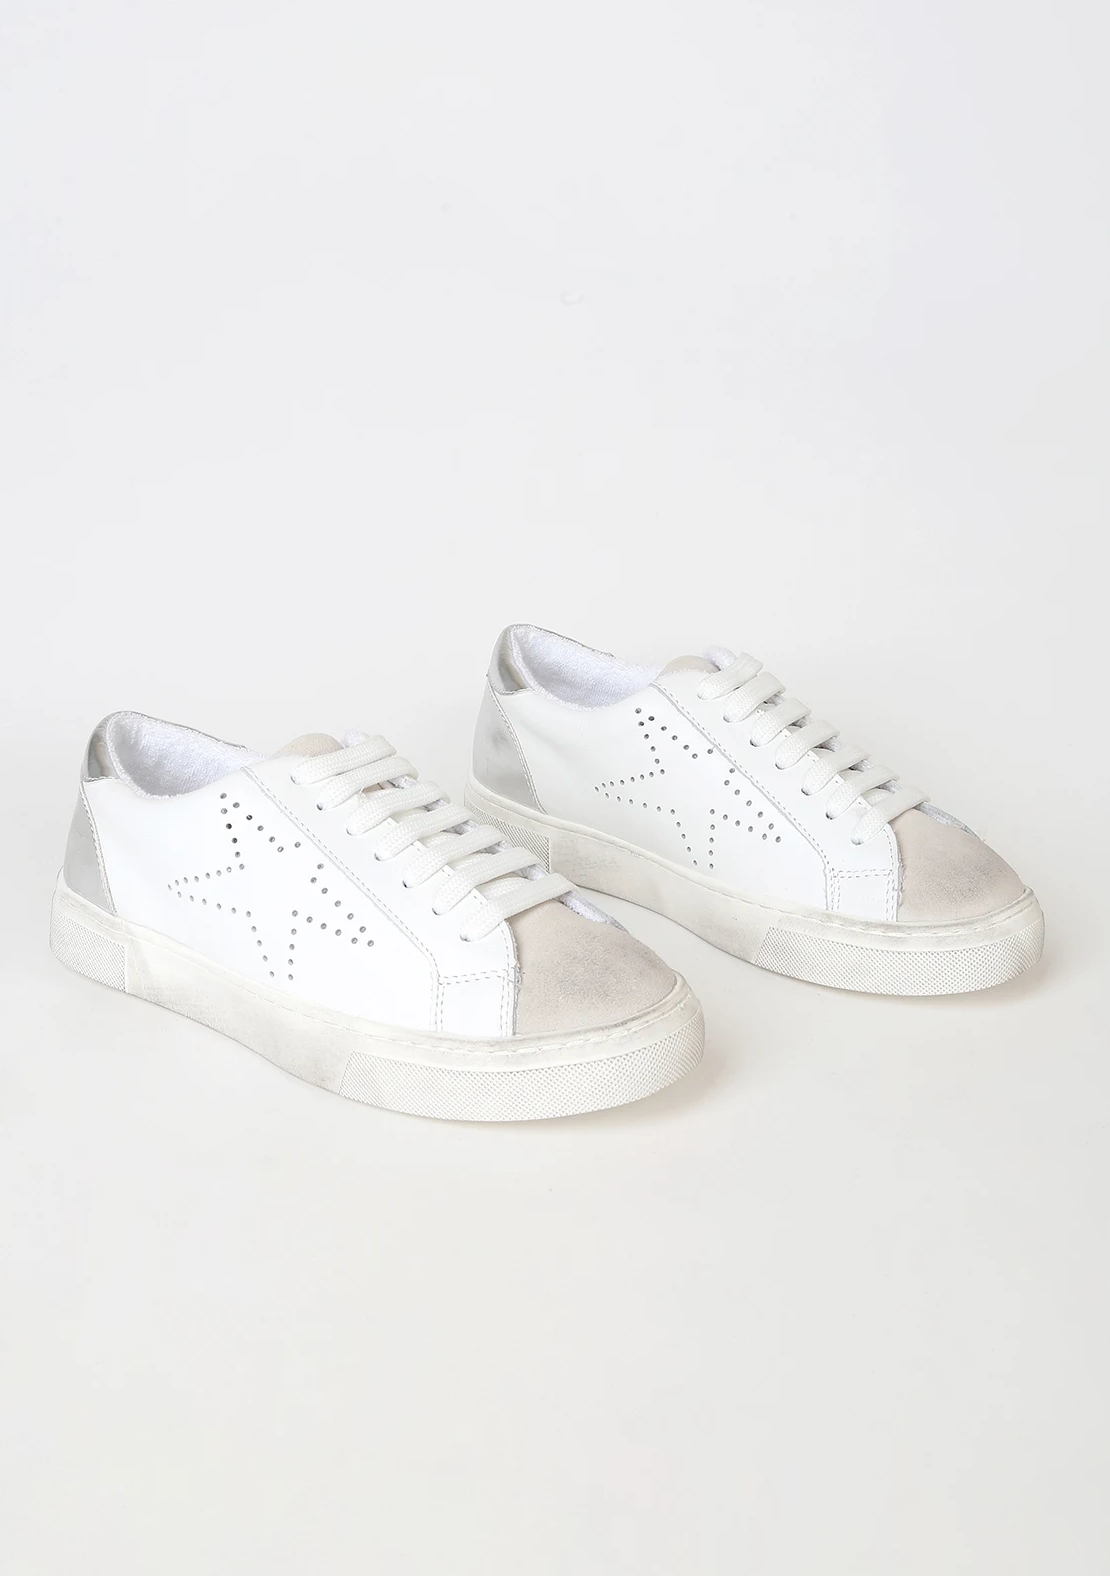 Steve Madden Rezume Distressed White Leather Sneakers